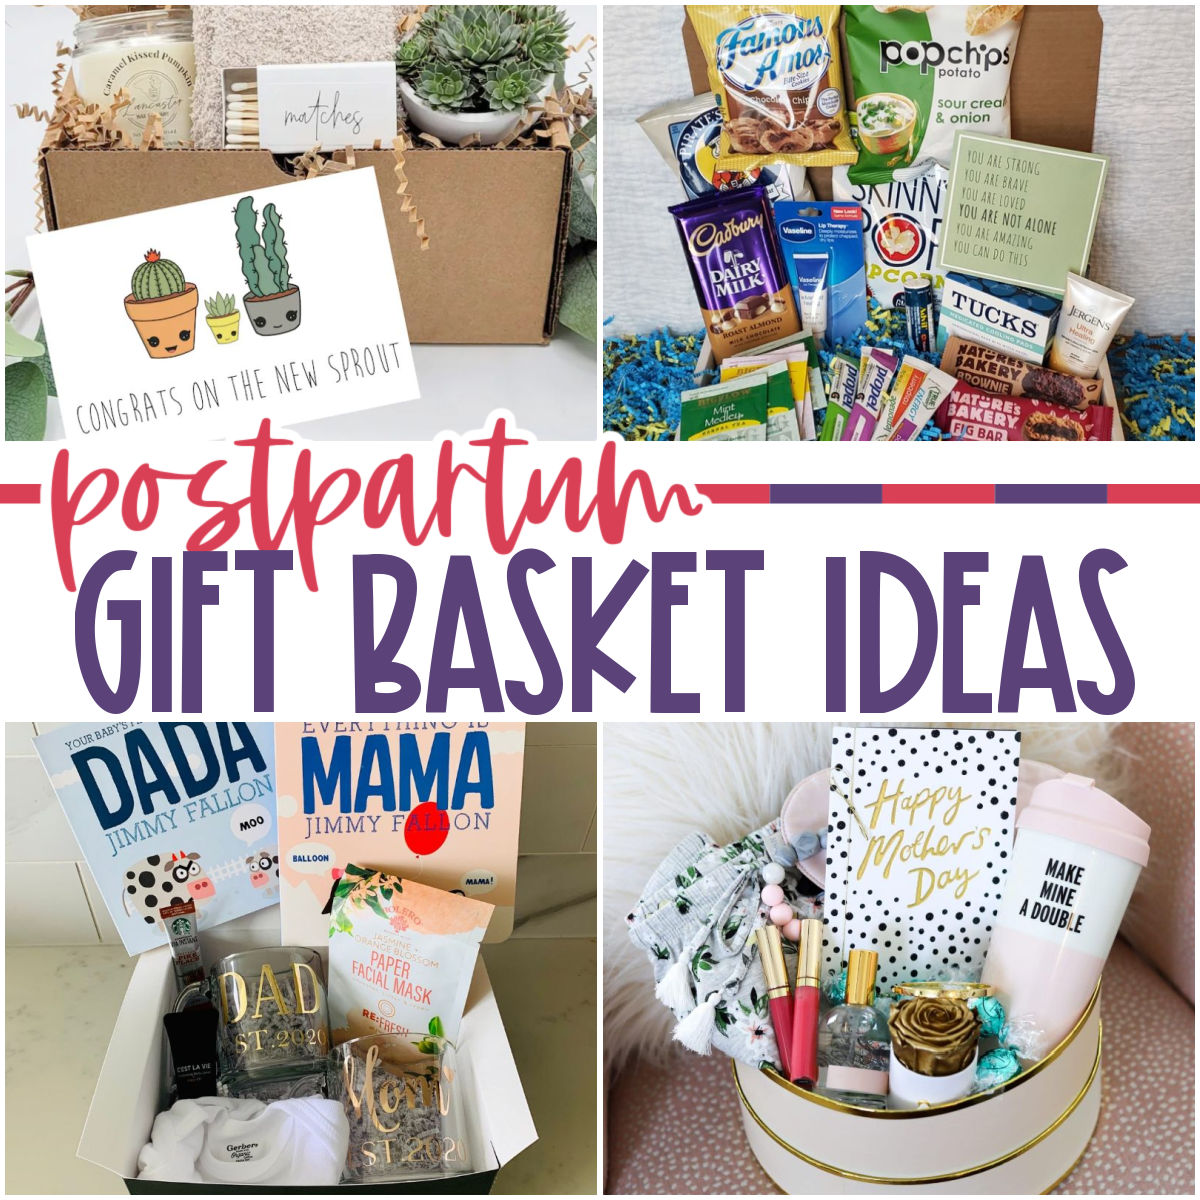 10 Postpartum Gift Basket Ideas - What Mommy Does